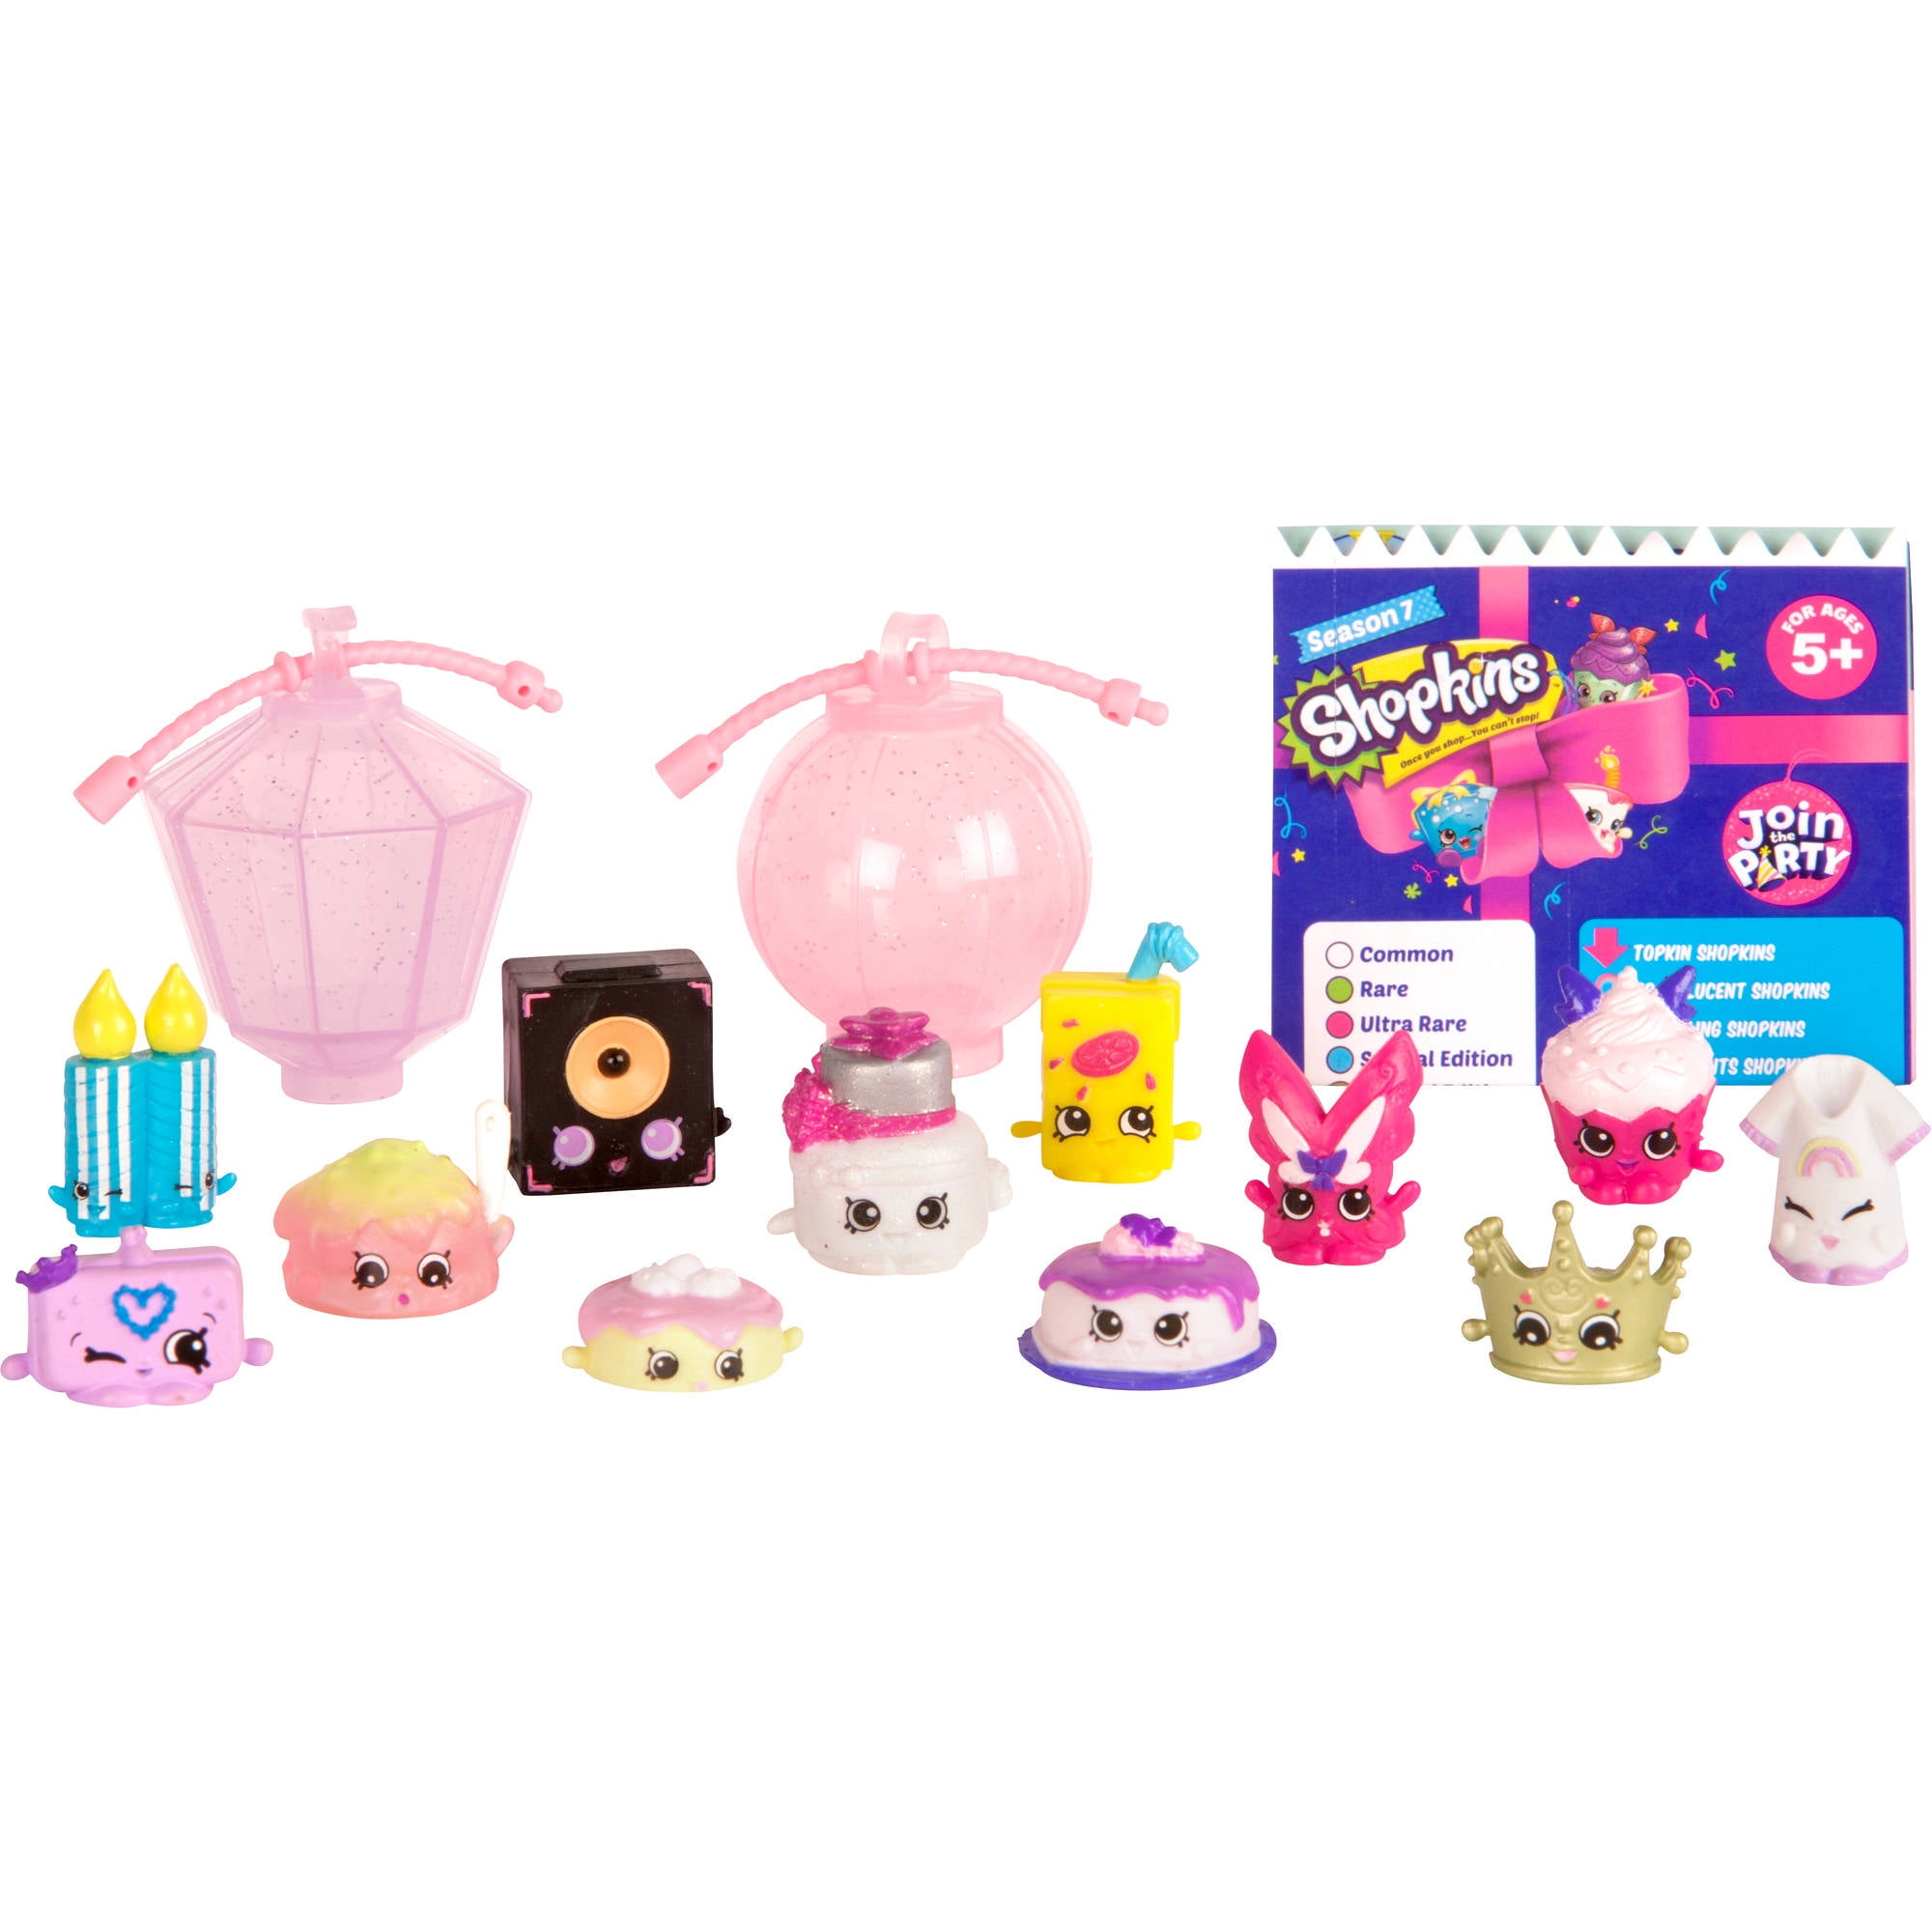 Shopkins Join the Party 12 Pack S7